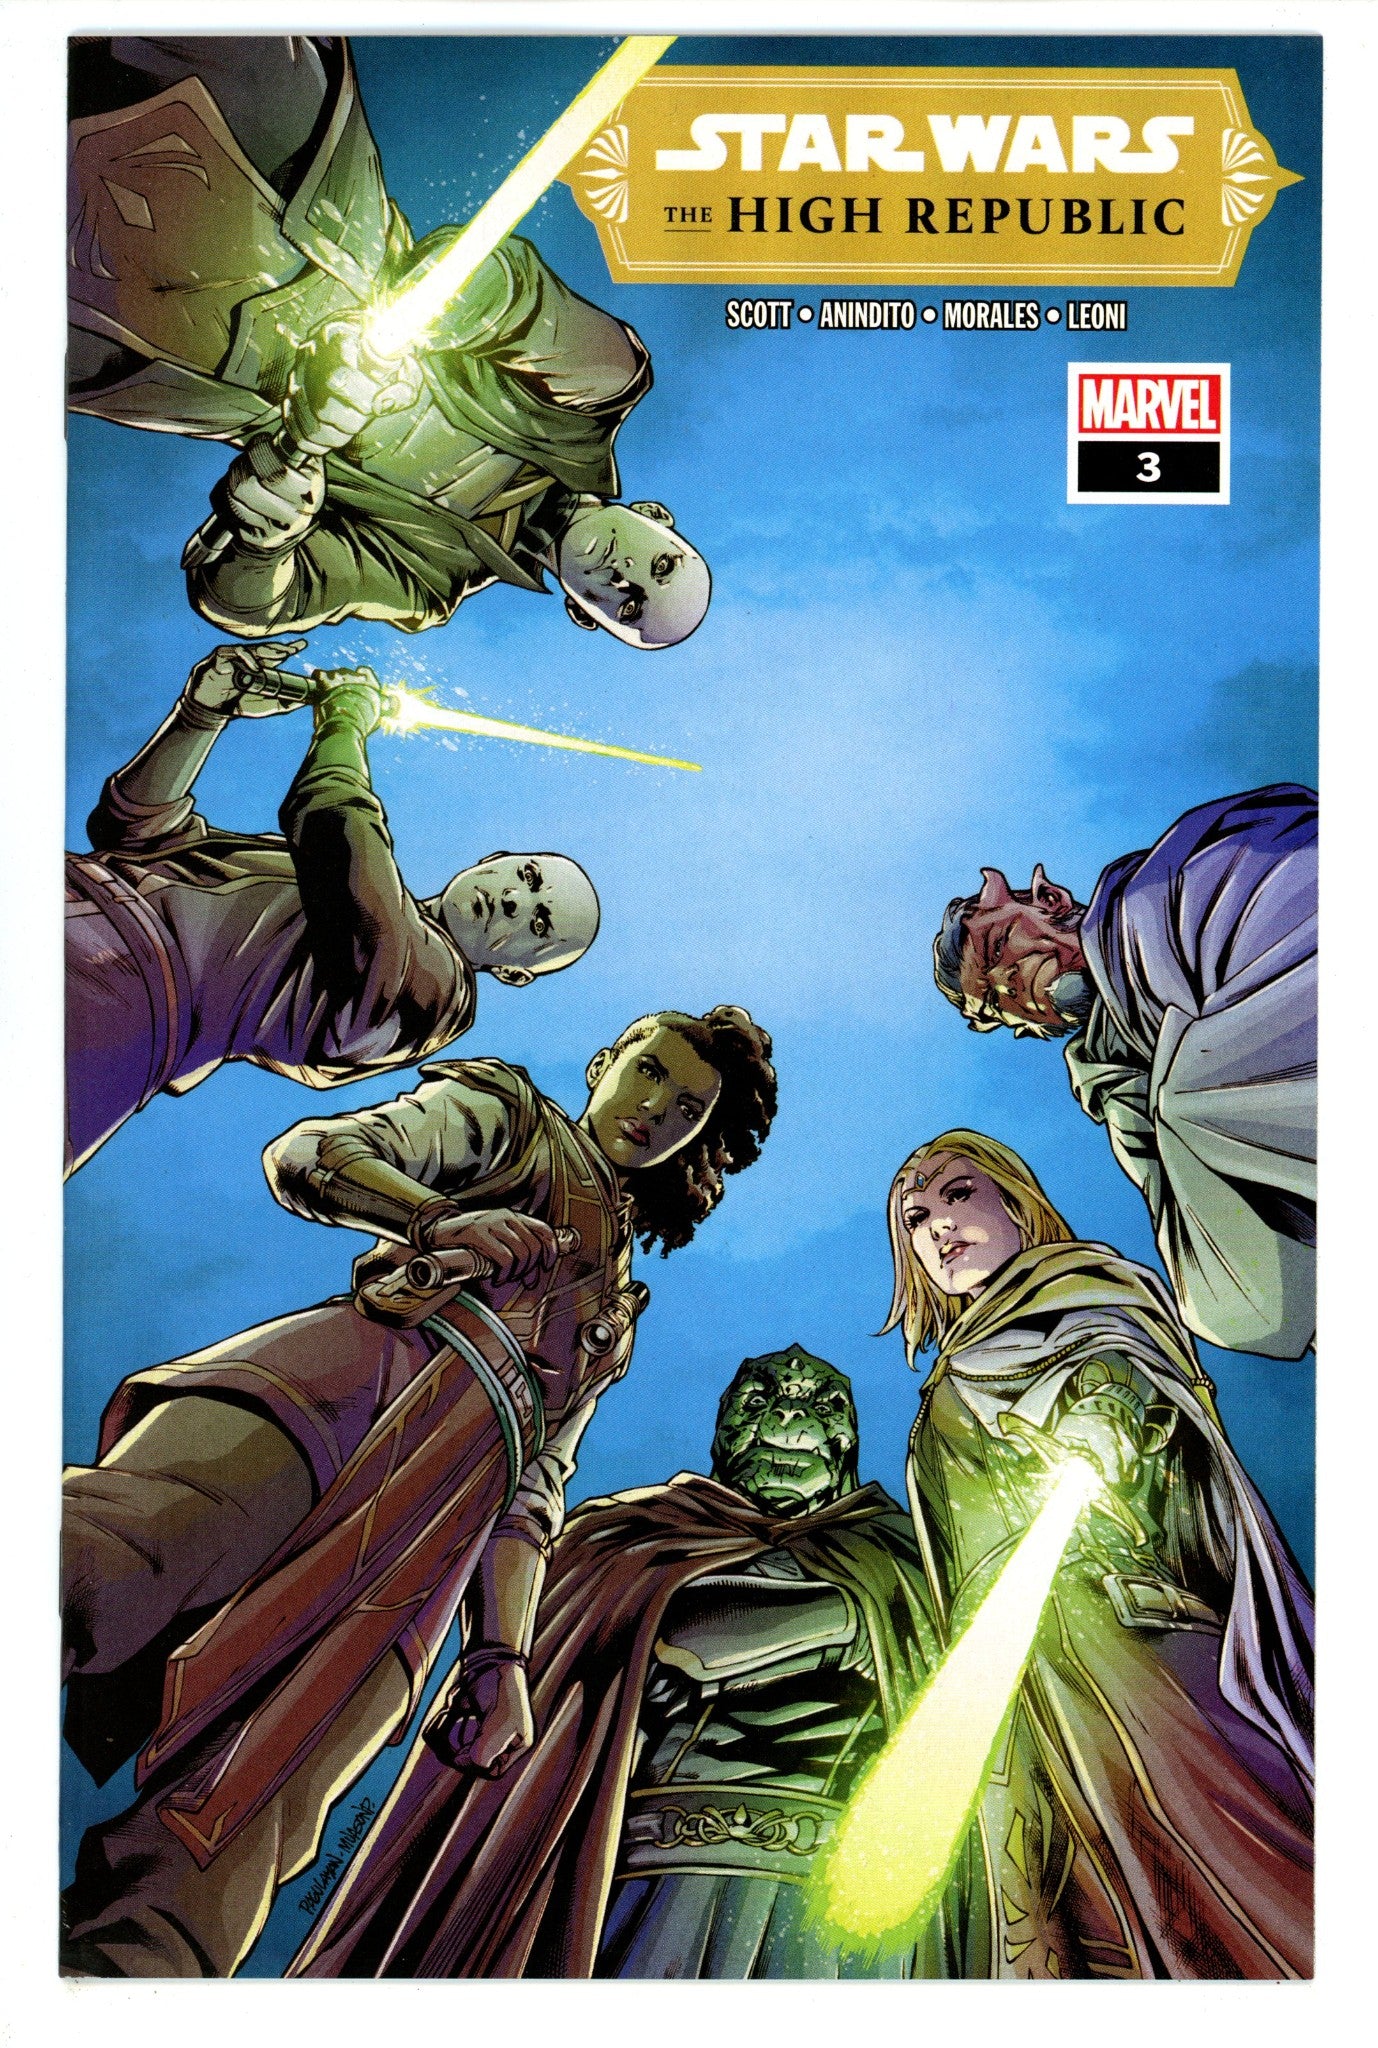 Star Wars: The High Republic Vol 1 3 High Grade (2021) Pagulayan Exclusive Variant 